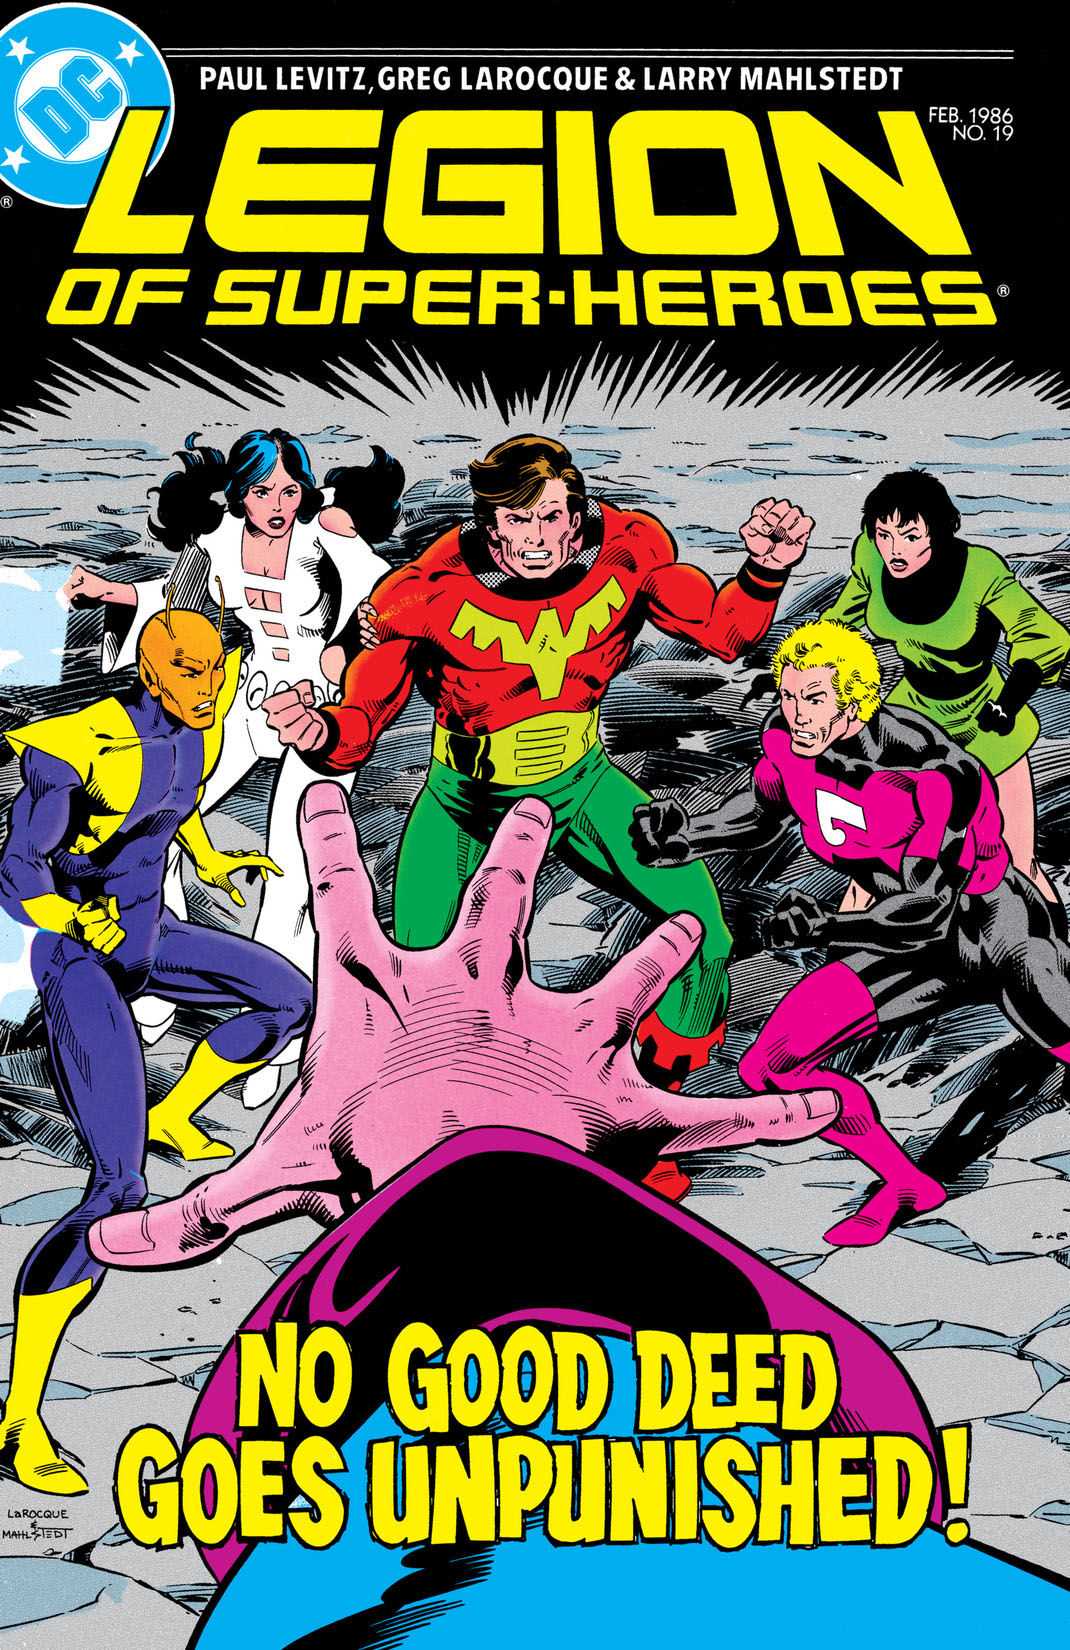 Legion of Super-Heroes (1984-) #19 preview images